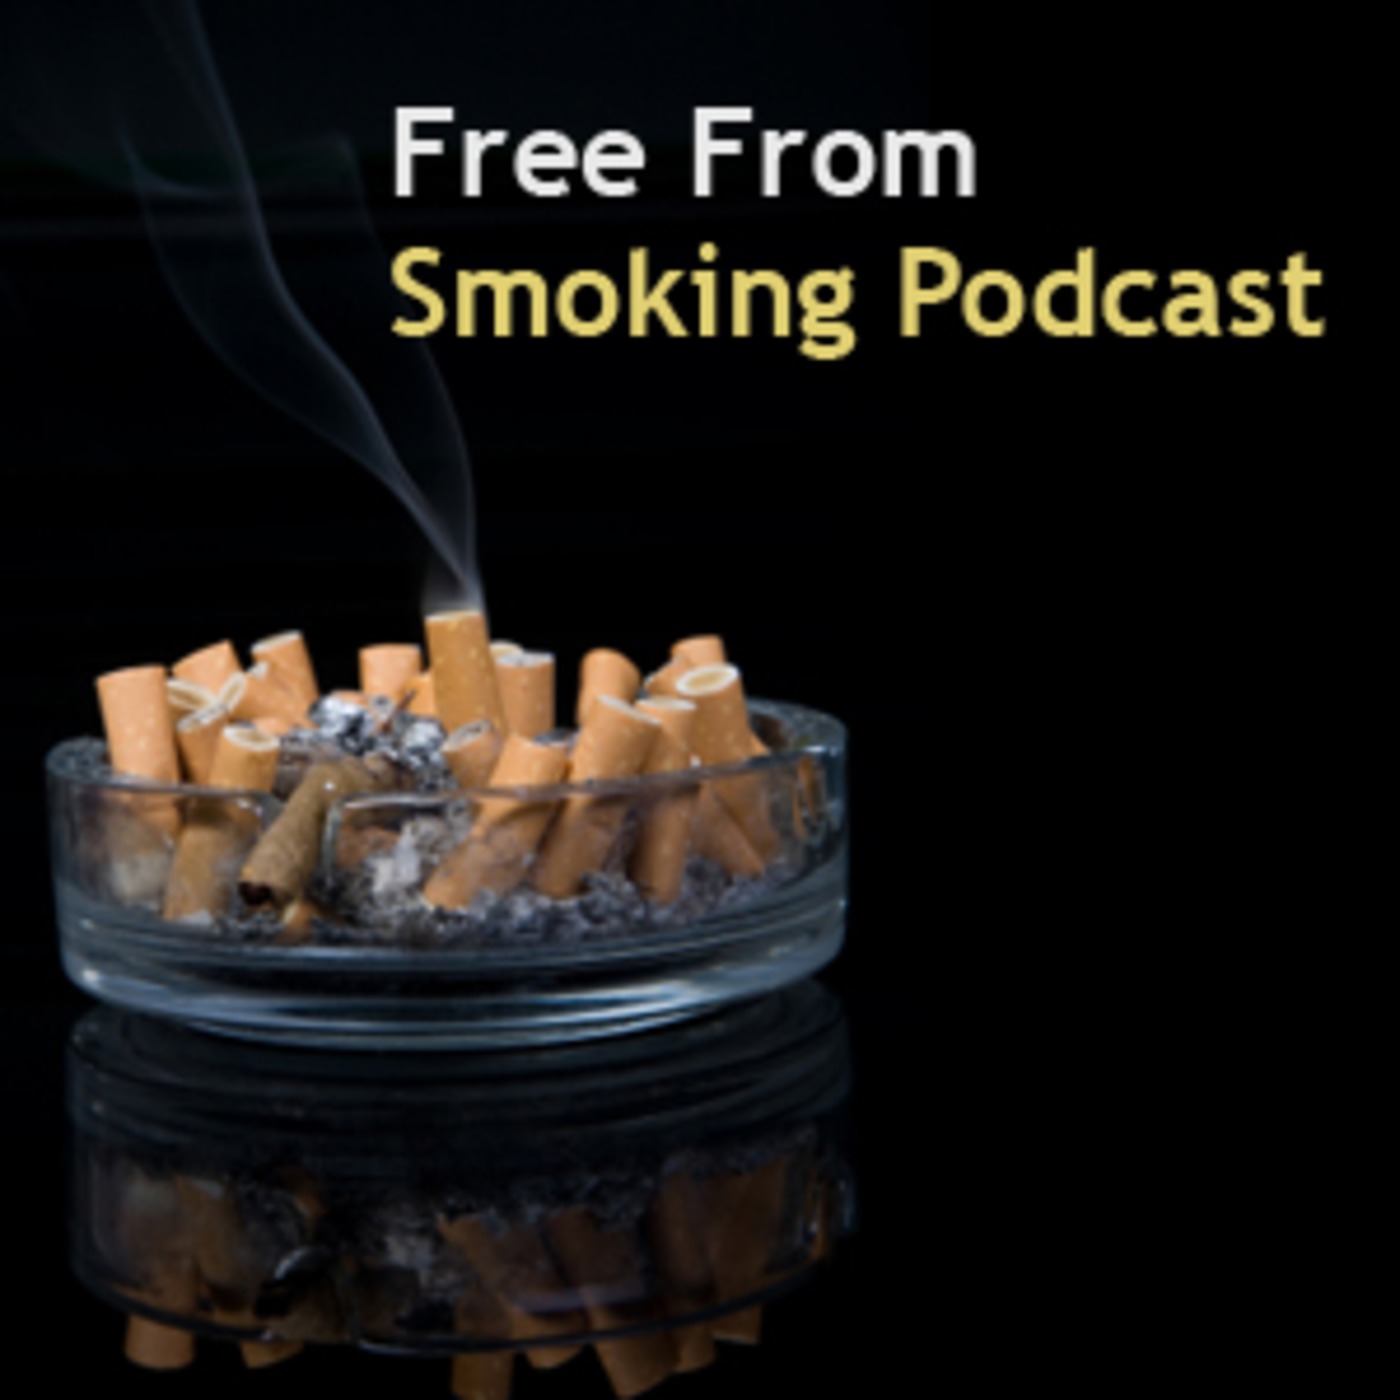 Free From Smoking Podcast